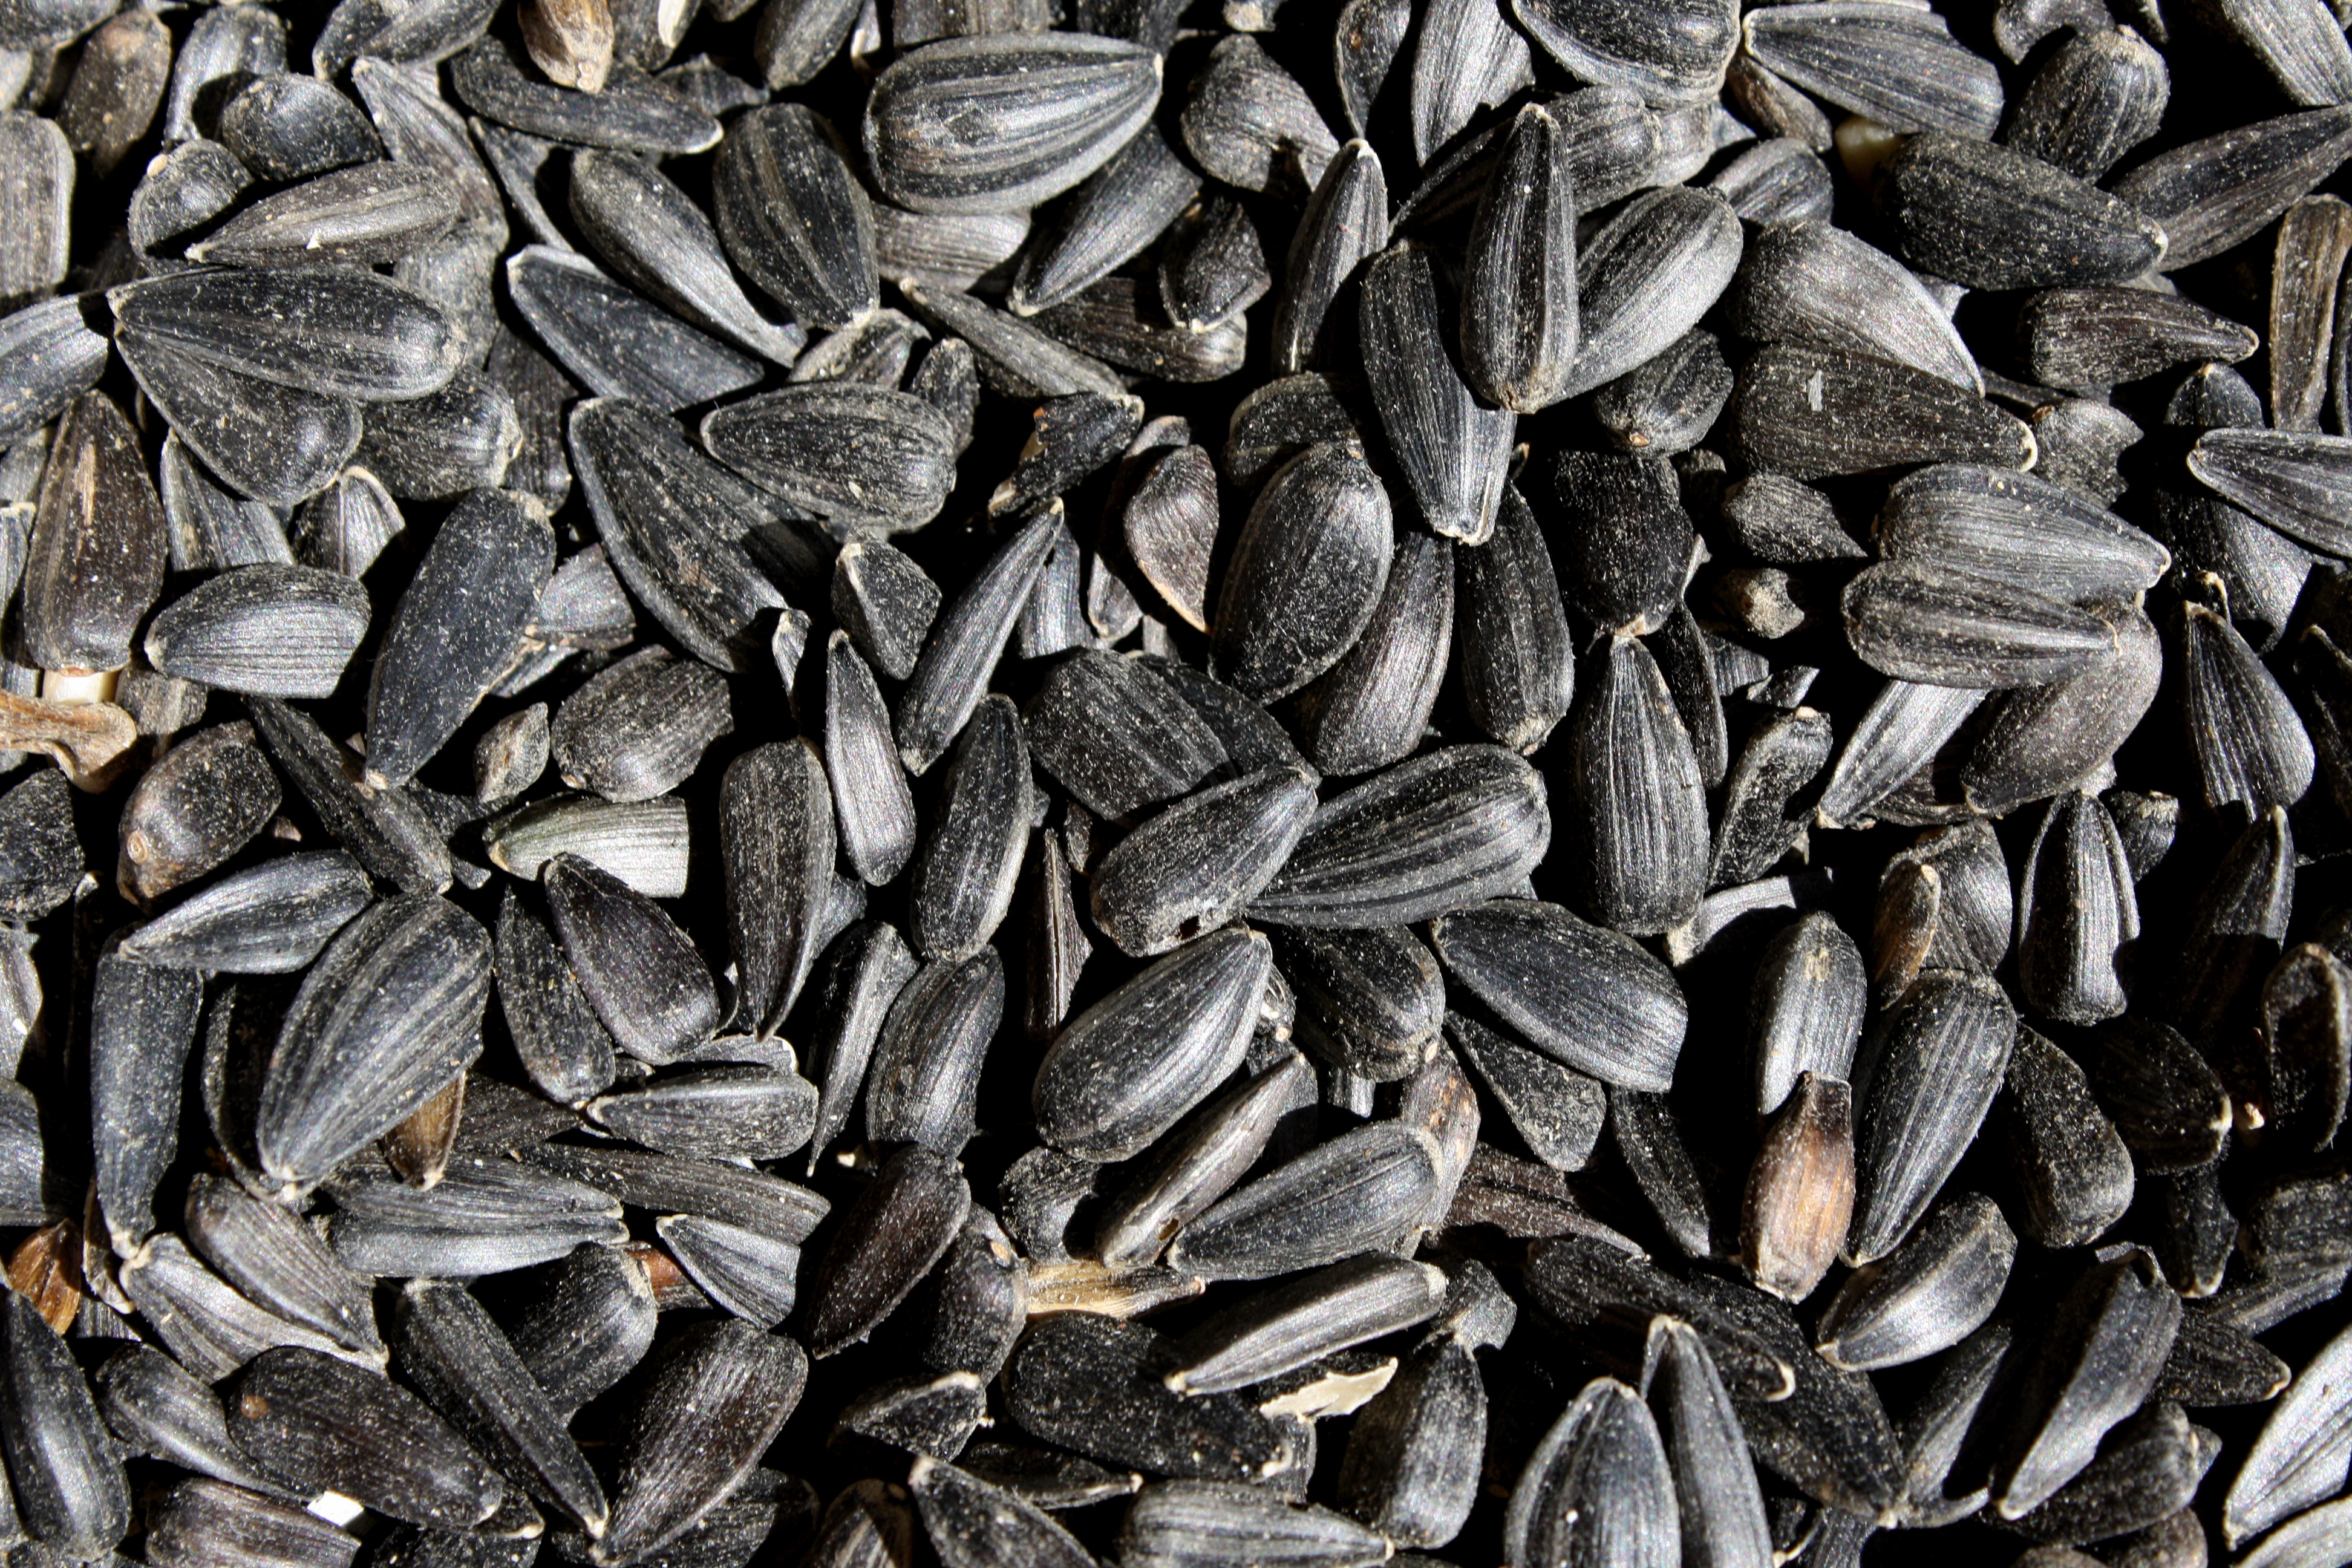 Black Sunflower Seeds Close Up Picture | Free Photograph ...